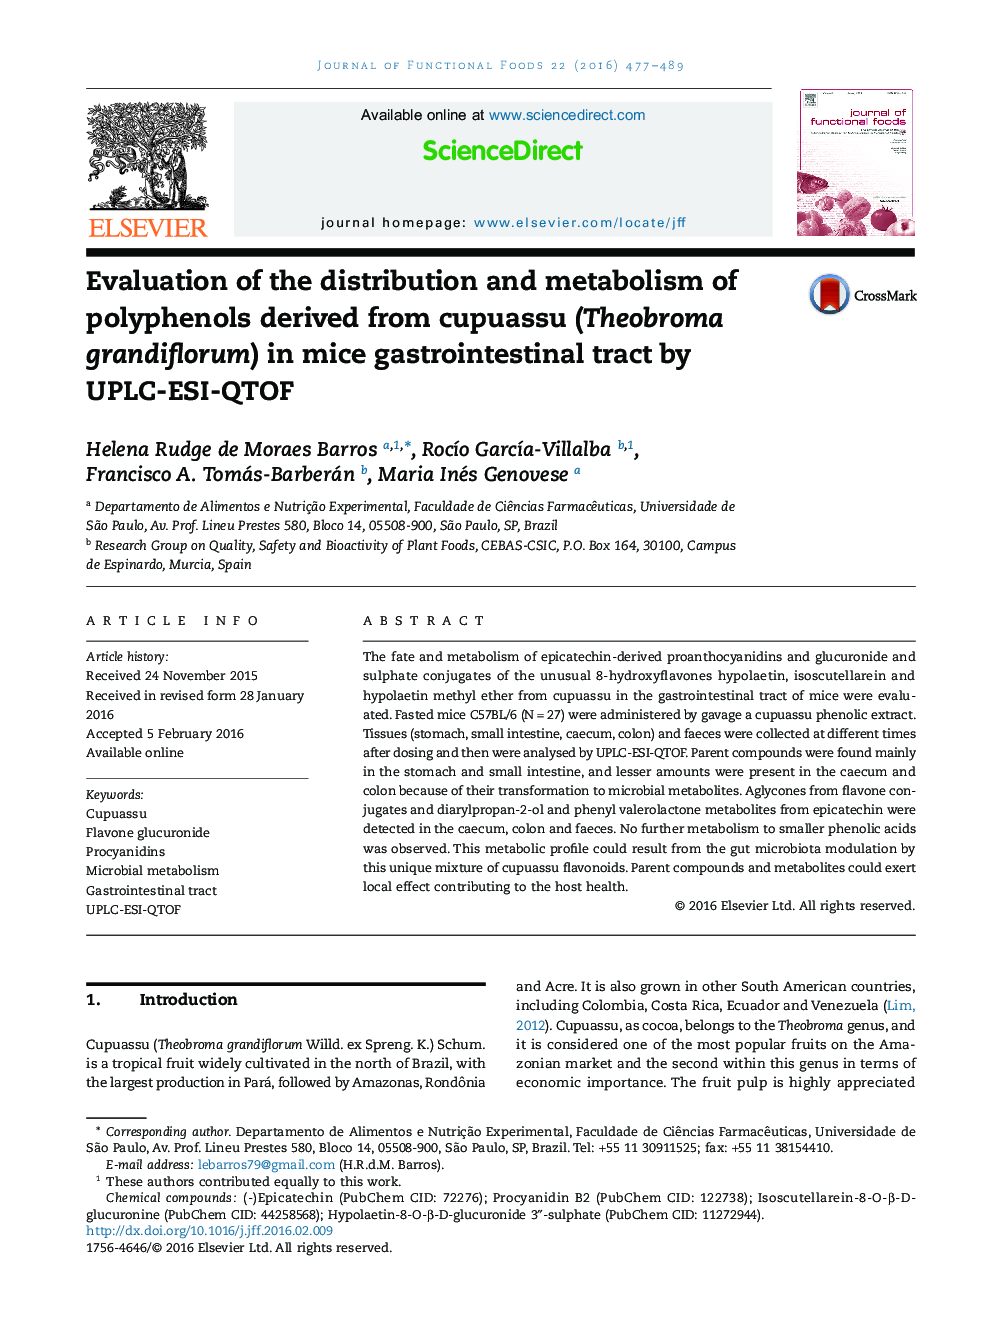 Evaluation of the distribution and metabolism of polyphenols derived from cupuassu (Theobroma grandiflorum) in mice gastrointestinal tract by UPLC-ESI-QTOF